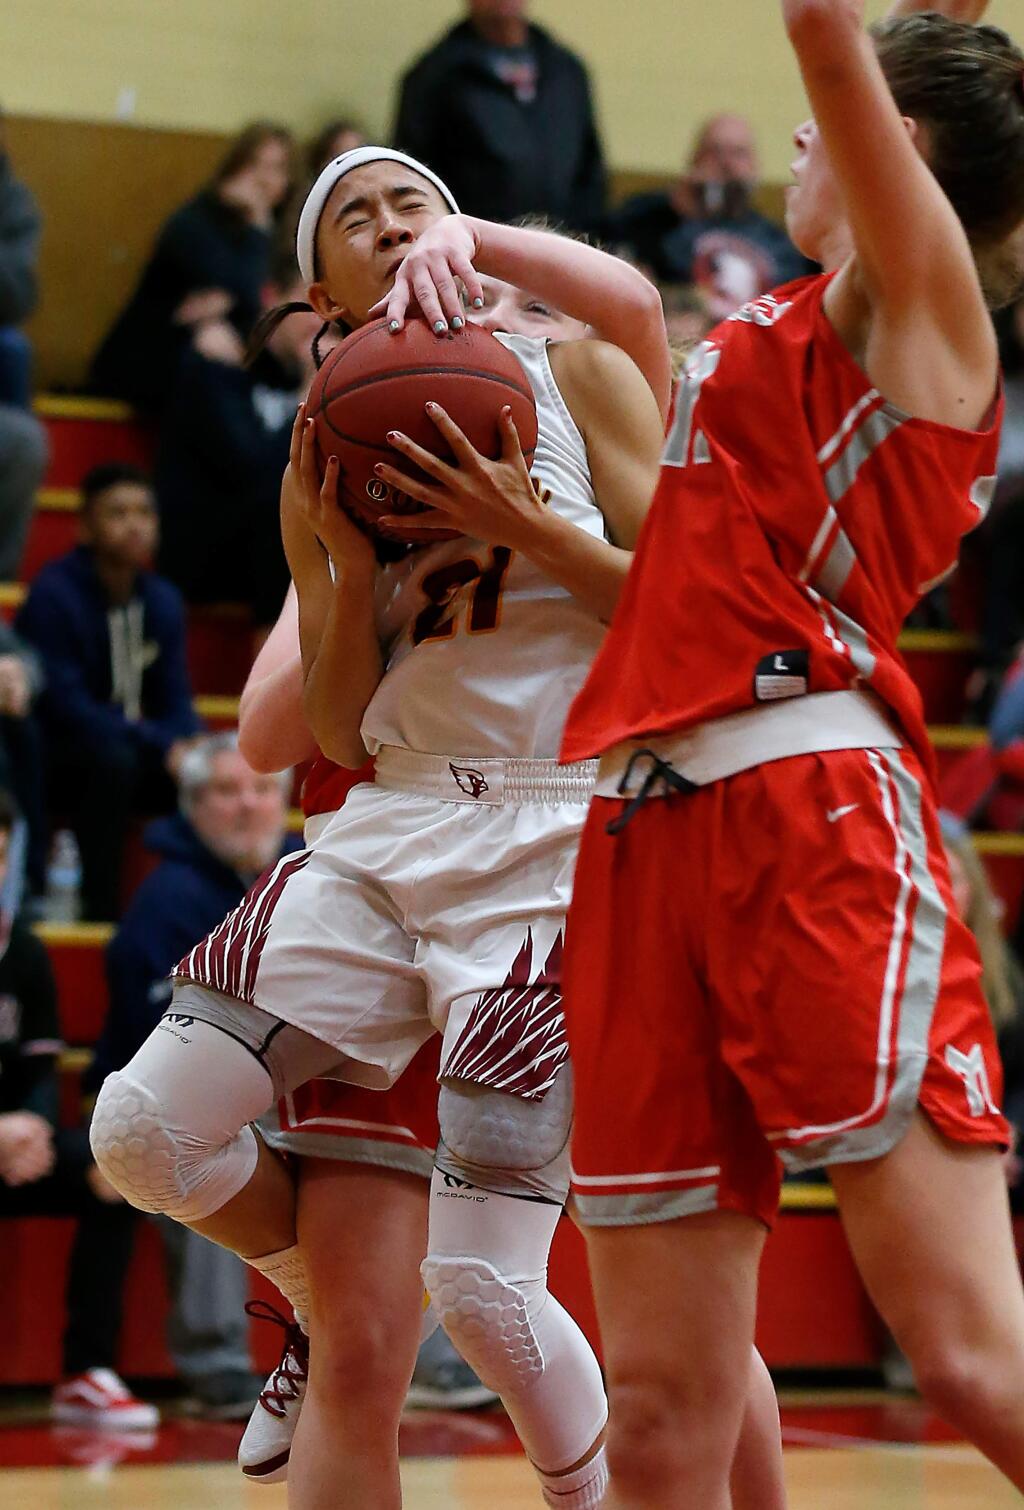 Cardinal Newman's Avery Cargill, left, gets fouled from behind by Montgomery's Ivy Lea as she attempts a layup during the first half on Tuesday, Jan. 15, 2019. (Alvin Jornada / The Press Democrat)